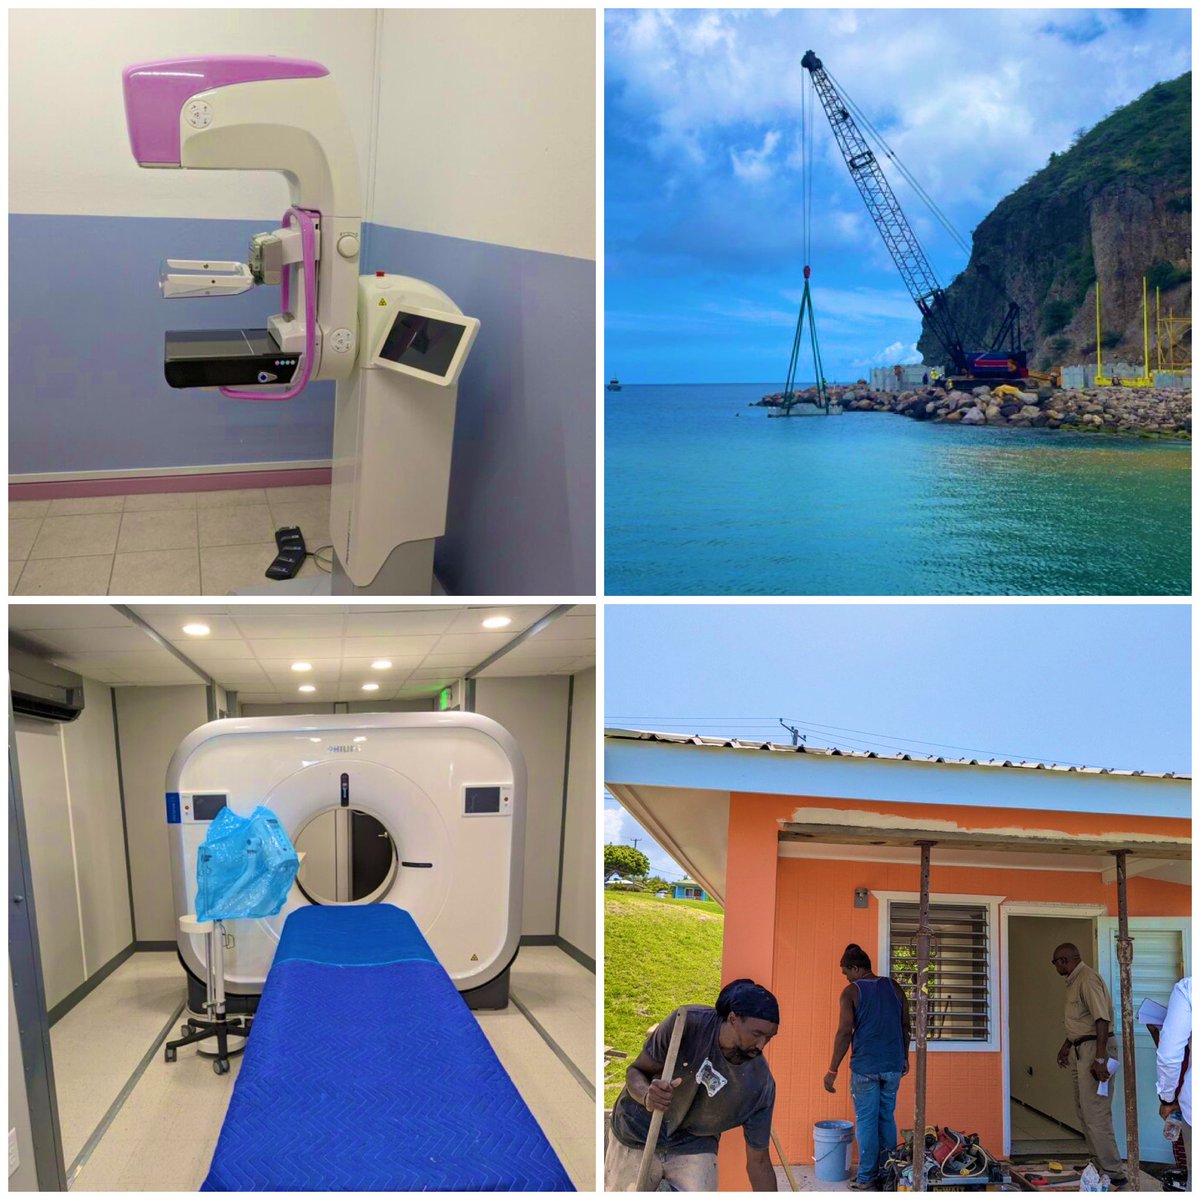 🏗️Colleagues recently visited the 🇬🇧 Overseas Territory of #Montserrat 🇲🇸to see @FCDOGovUK funded projects: 🩻the island’s first mammogram & CT scanners ⚓️ new port 🏠 refurbished social housing 🚸 refurbished school buildings